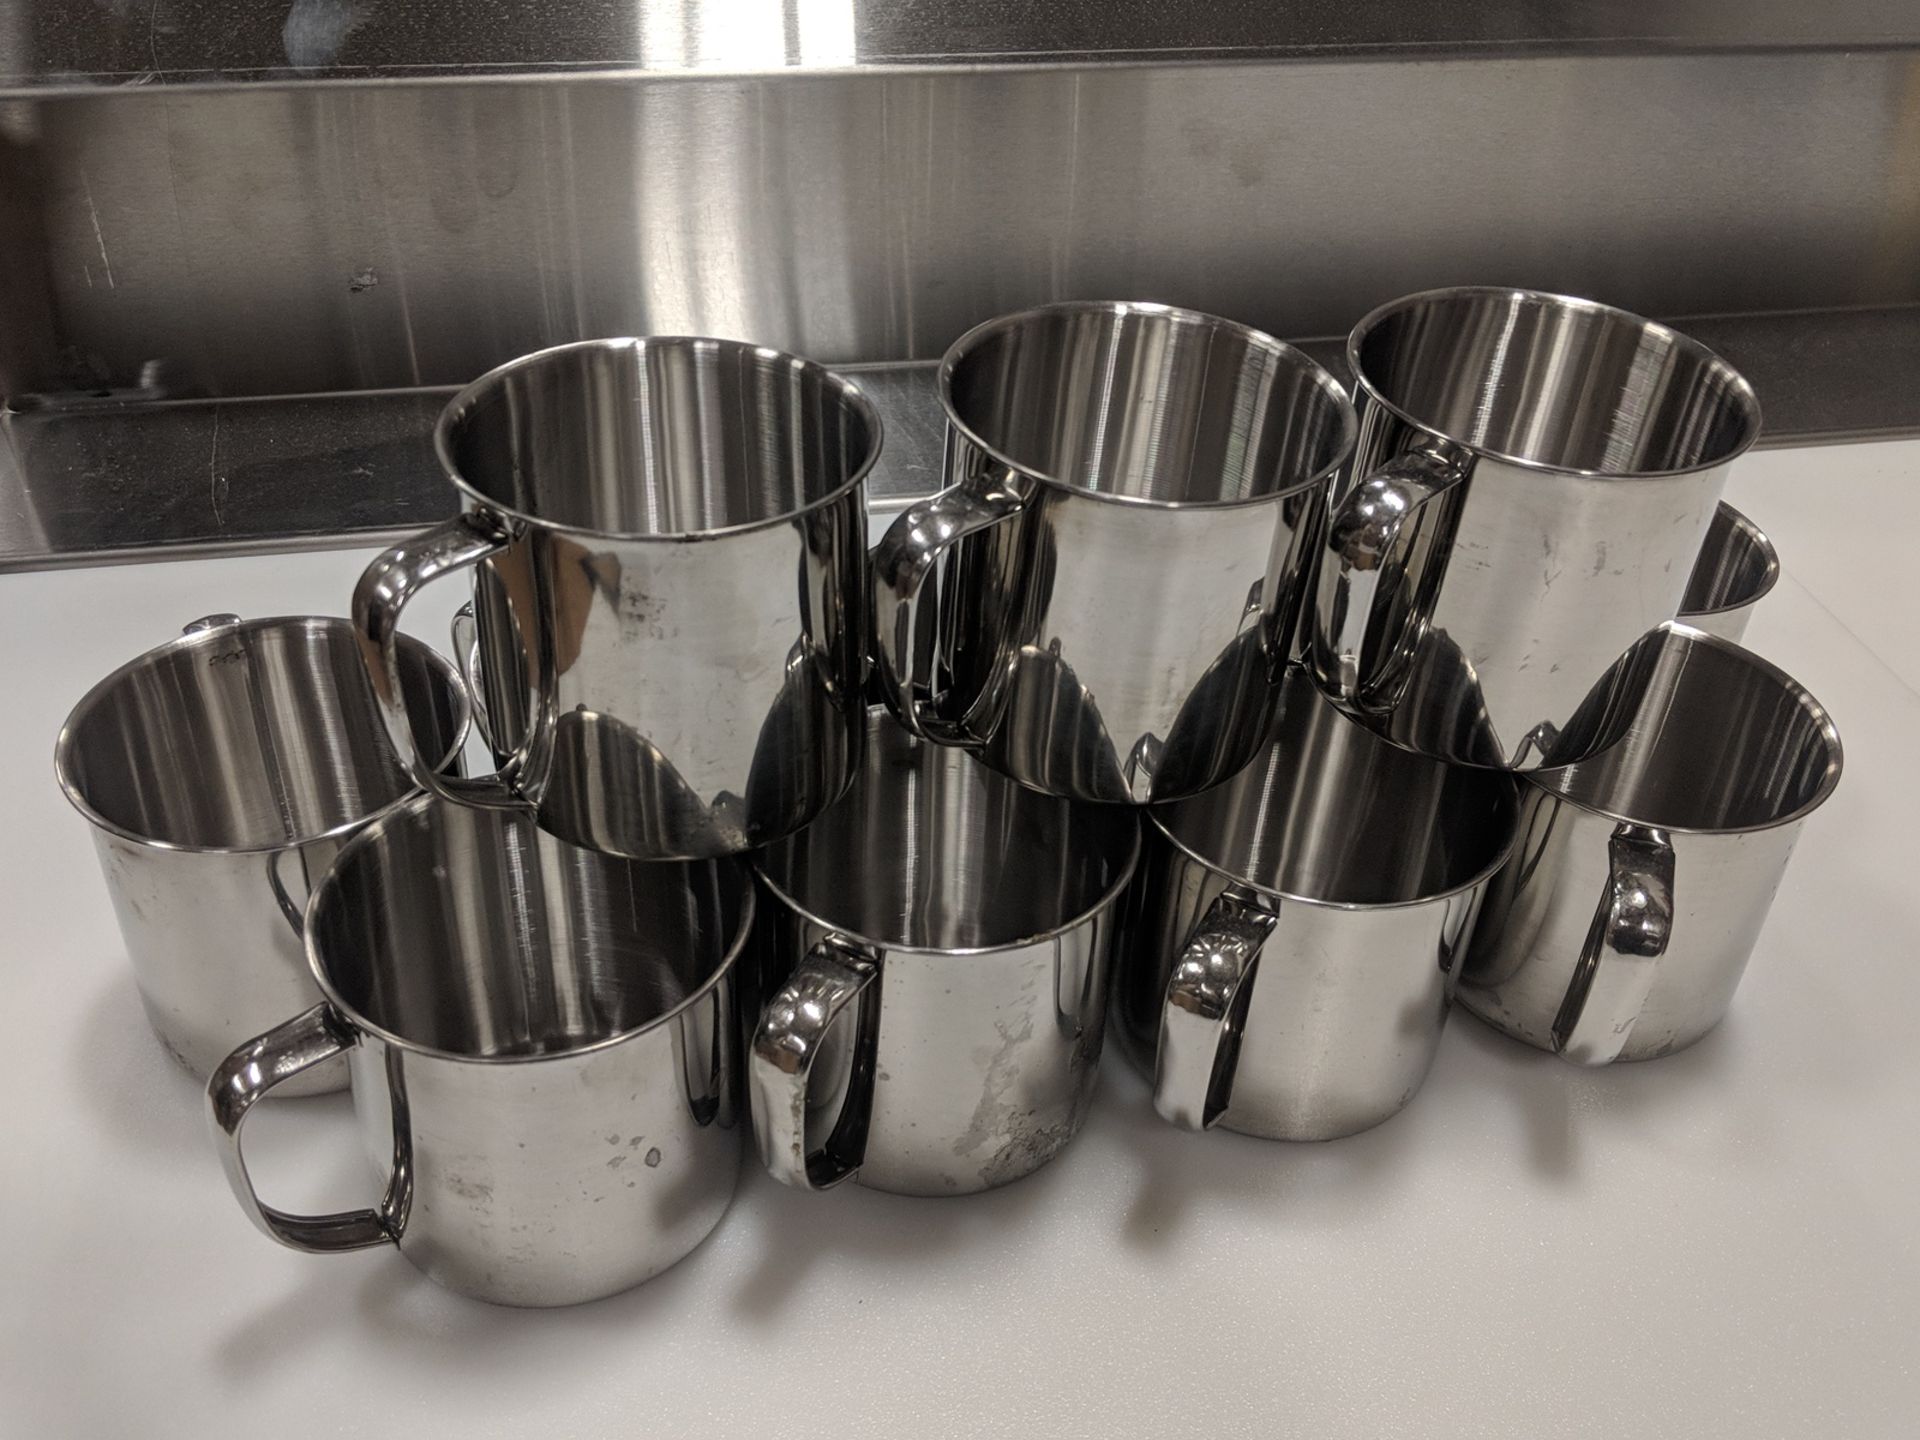 Small Stainless Steel Mugs - Lot of 12 - Image 3 of 3